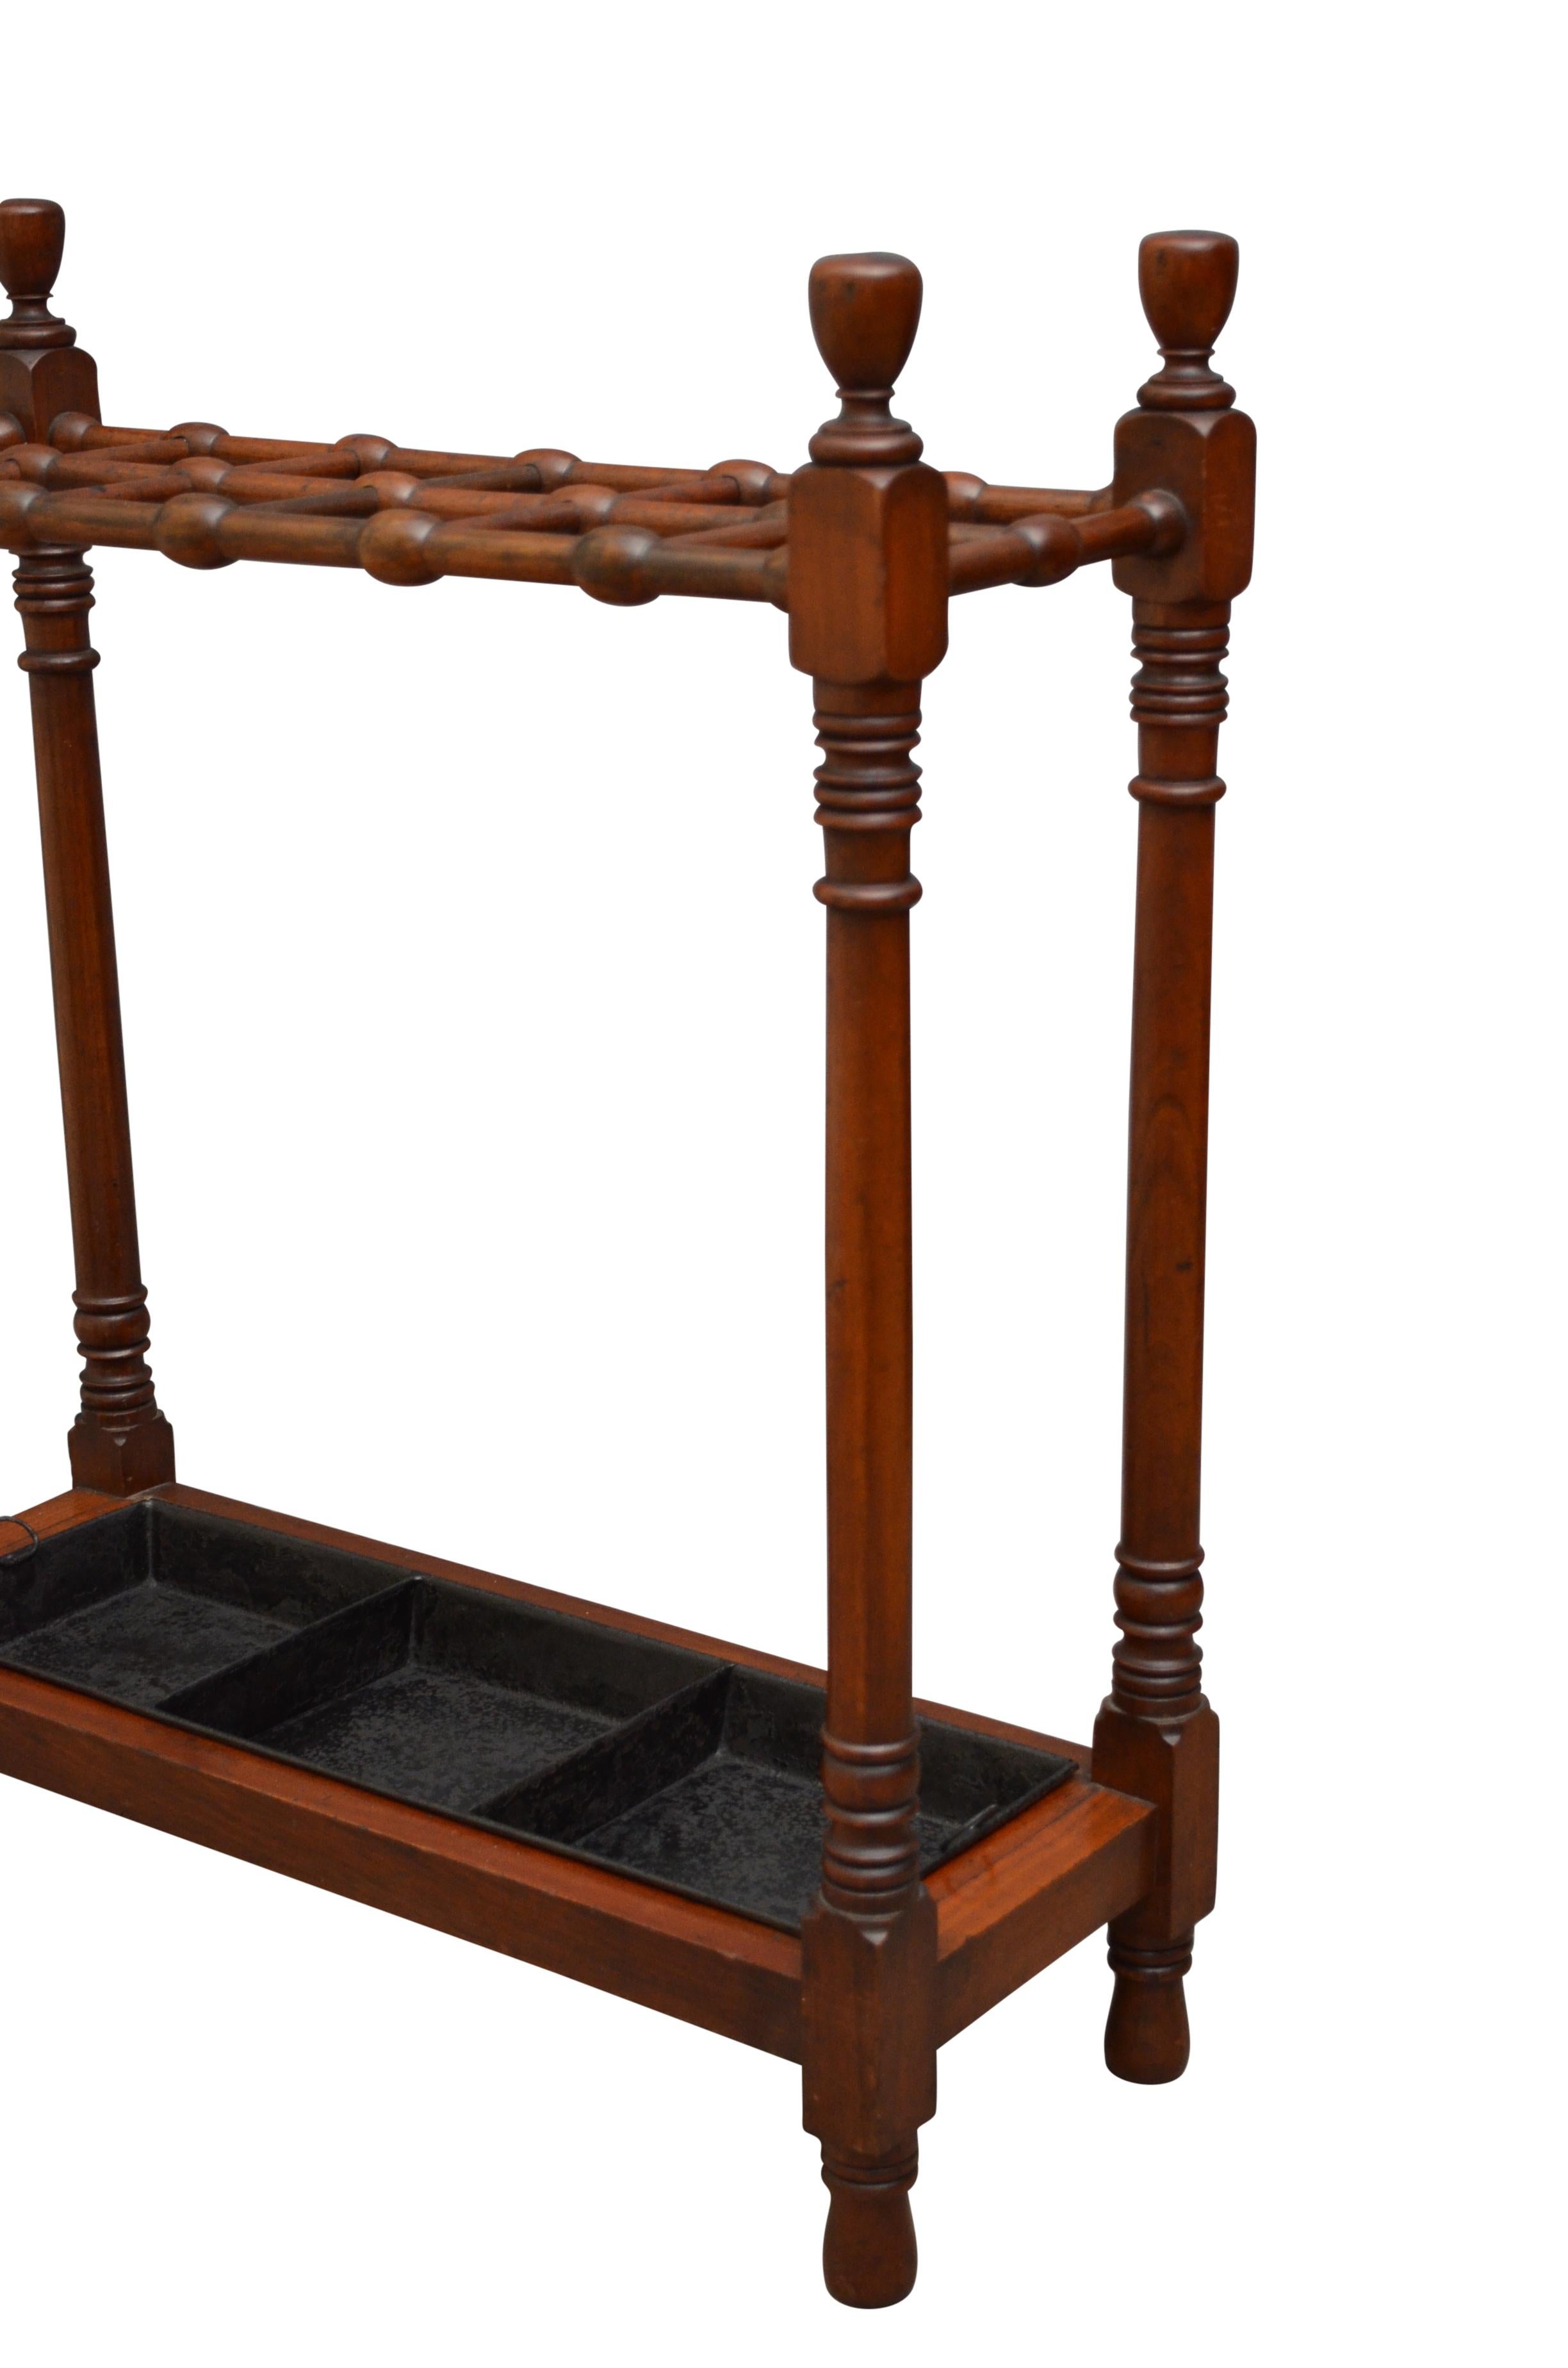 Stylish Arts and Crafts Umbrella Stand in Mahogany In Good Condition For Sale In Whaley Bridge, GB